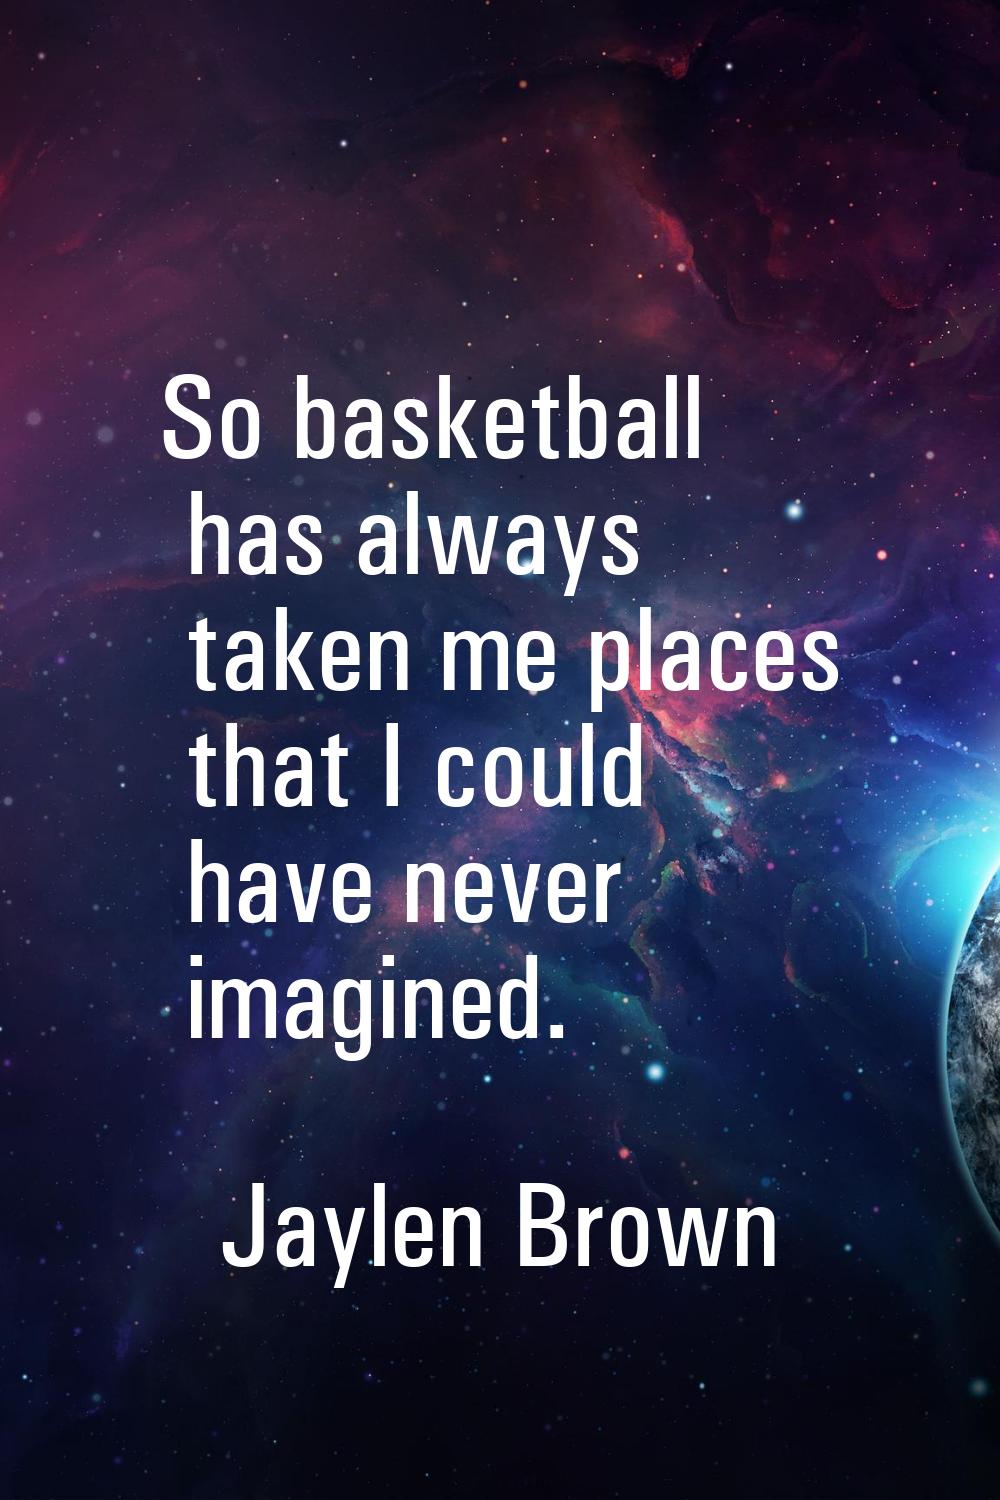 So basketball has always taken me places that I could have never imagined.